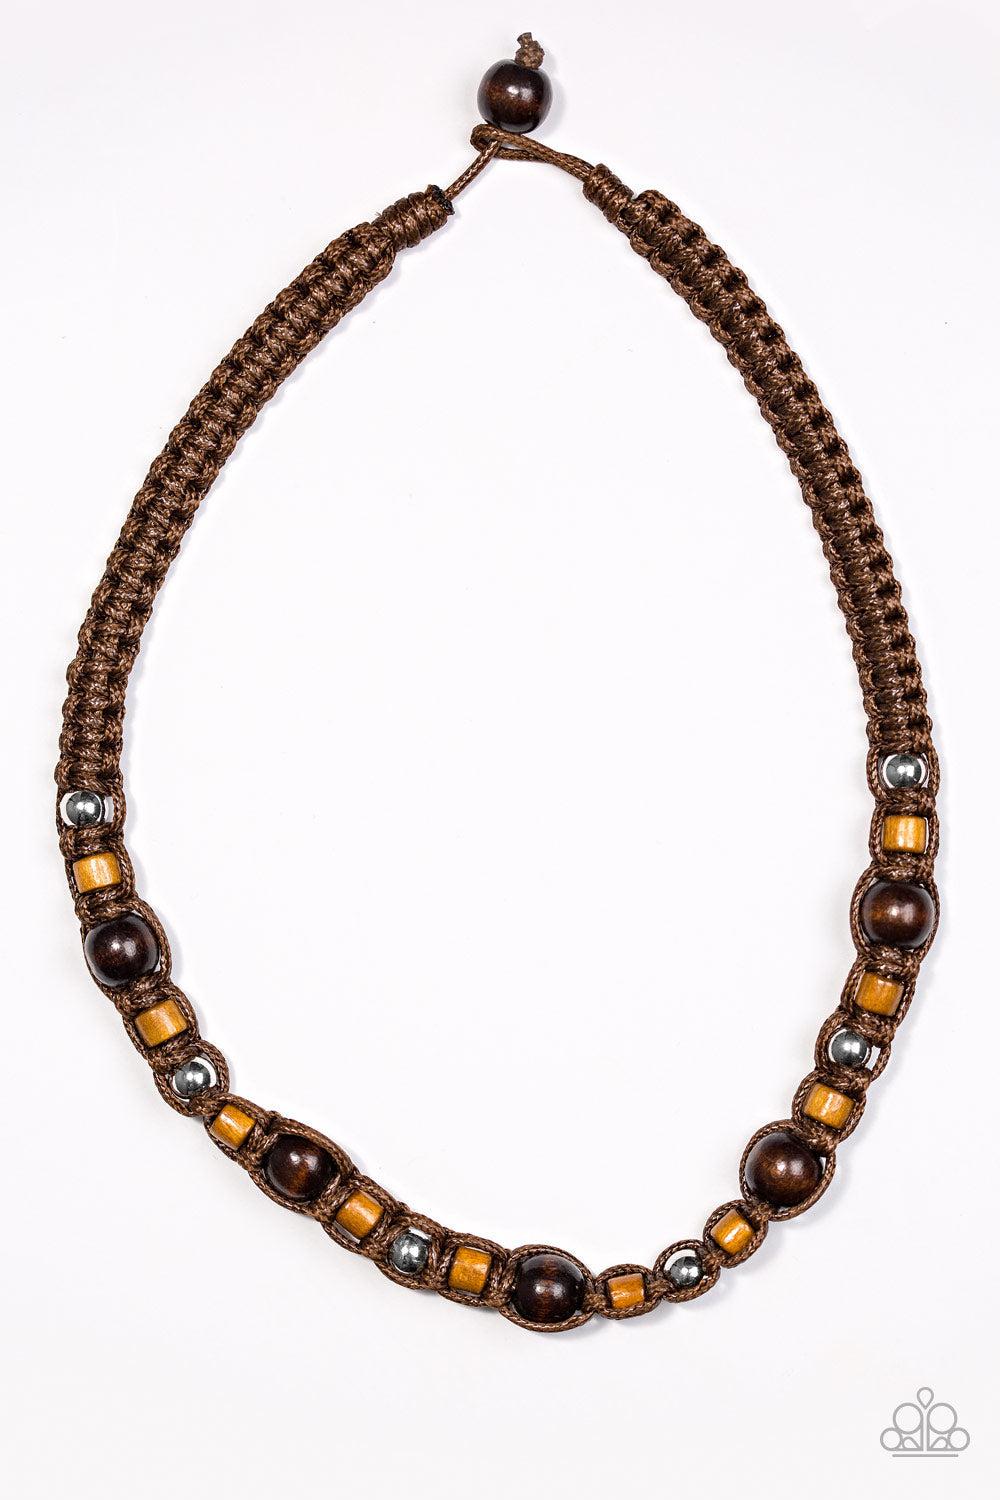 Deck Crew Brown Urban Necklace - Paparazzi Accessories- lightbox - CarasShop.com - $5 Jewelry by Cara Jewels